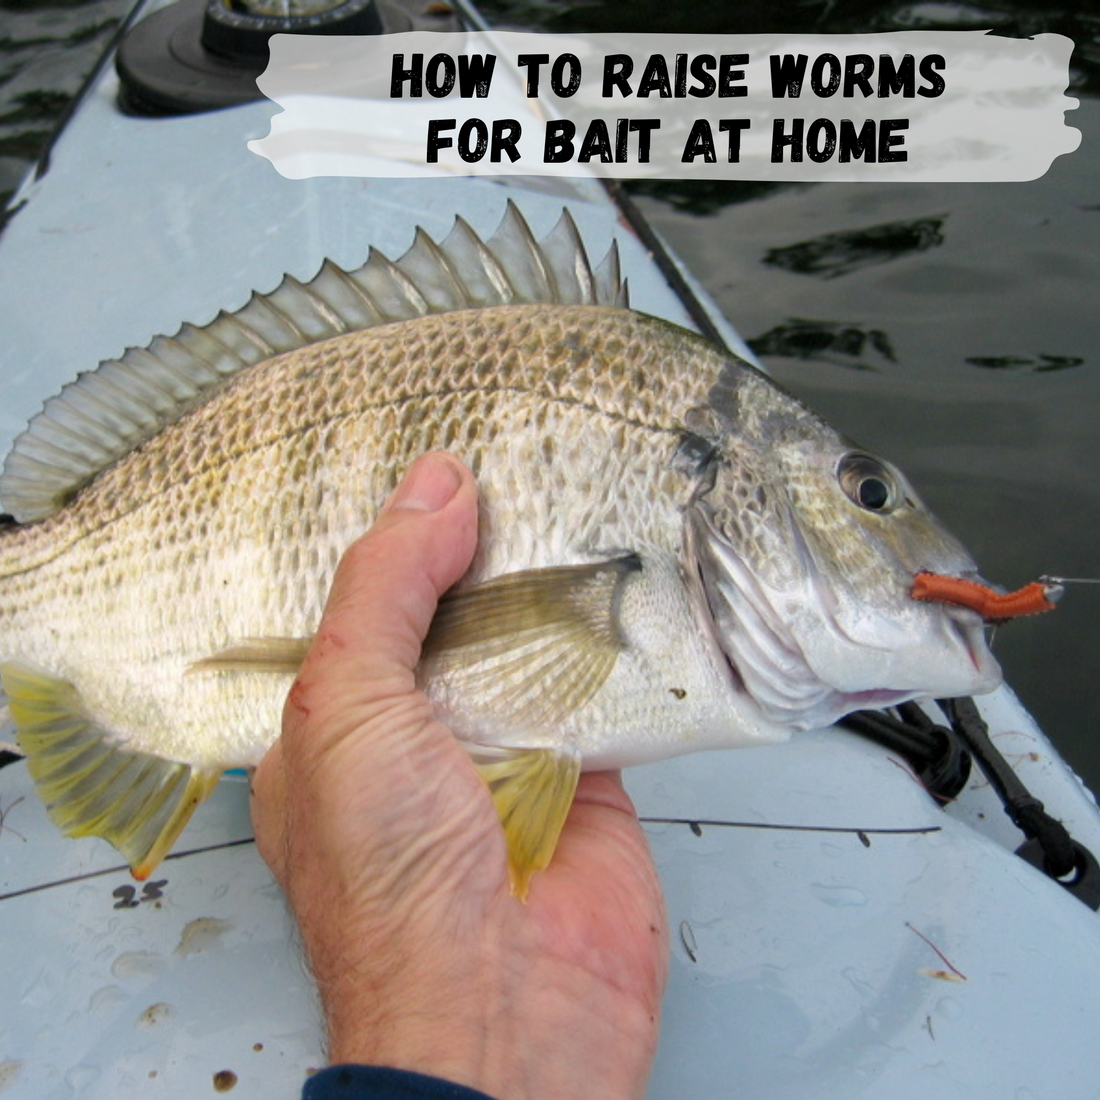 What is the best fishing bait to use if I don't want to kill worms